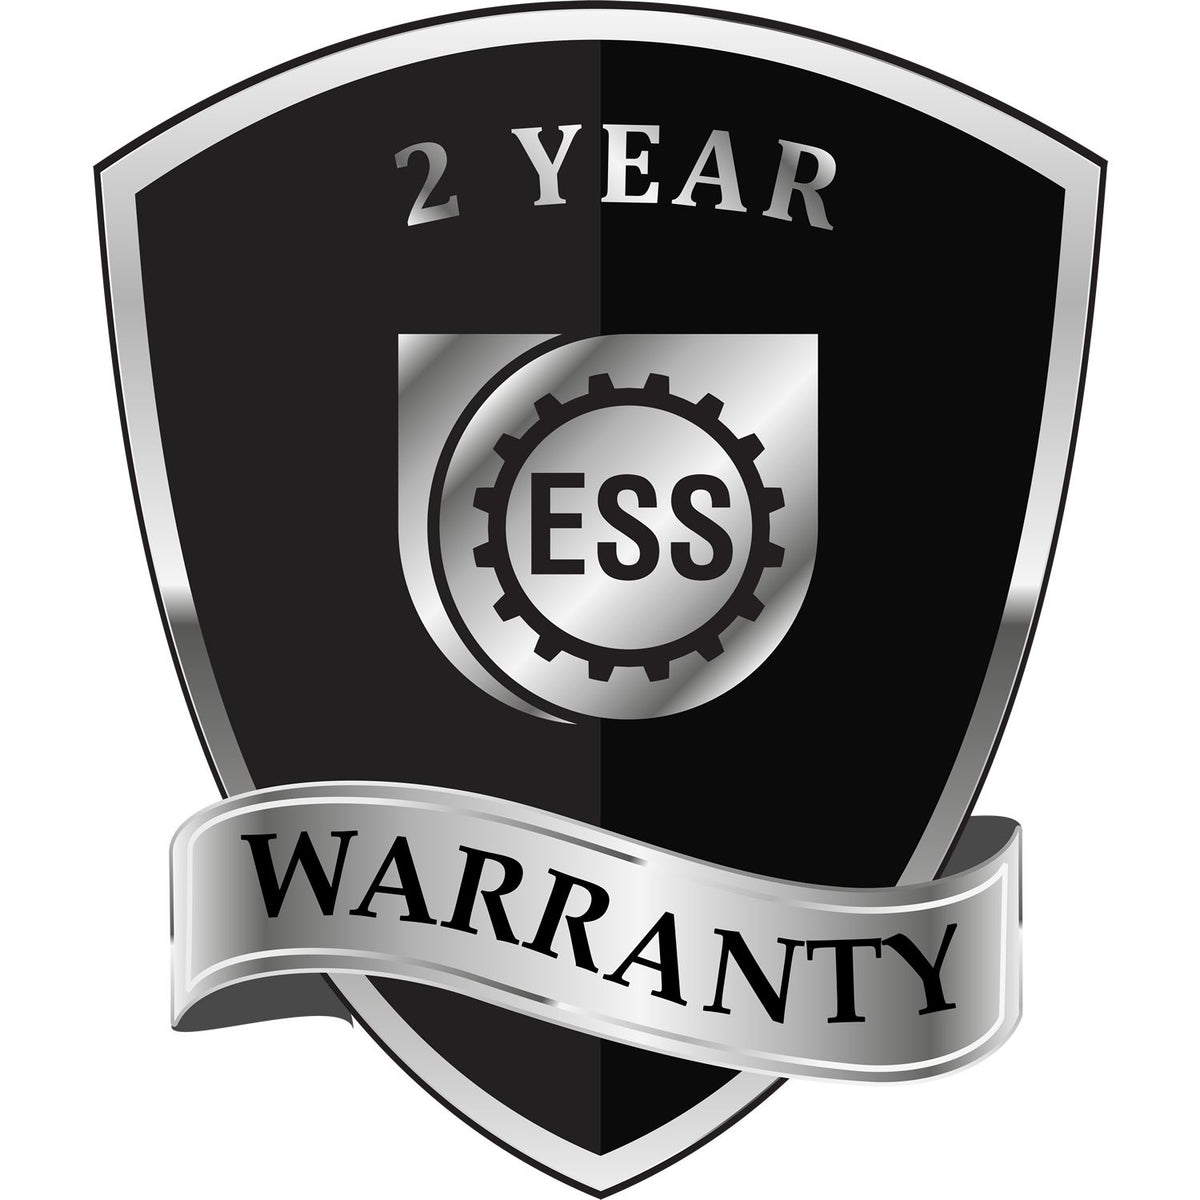 A badge or emblem showing a warranty icon for the Heavy Duty Cast Iron South Dakota Architect Embosser